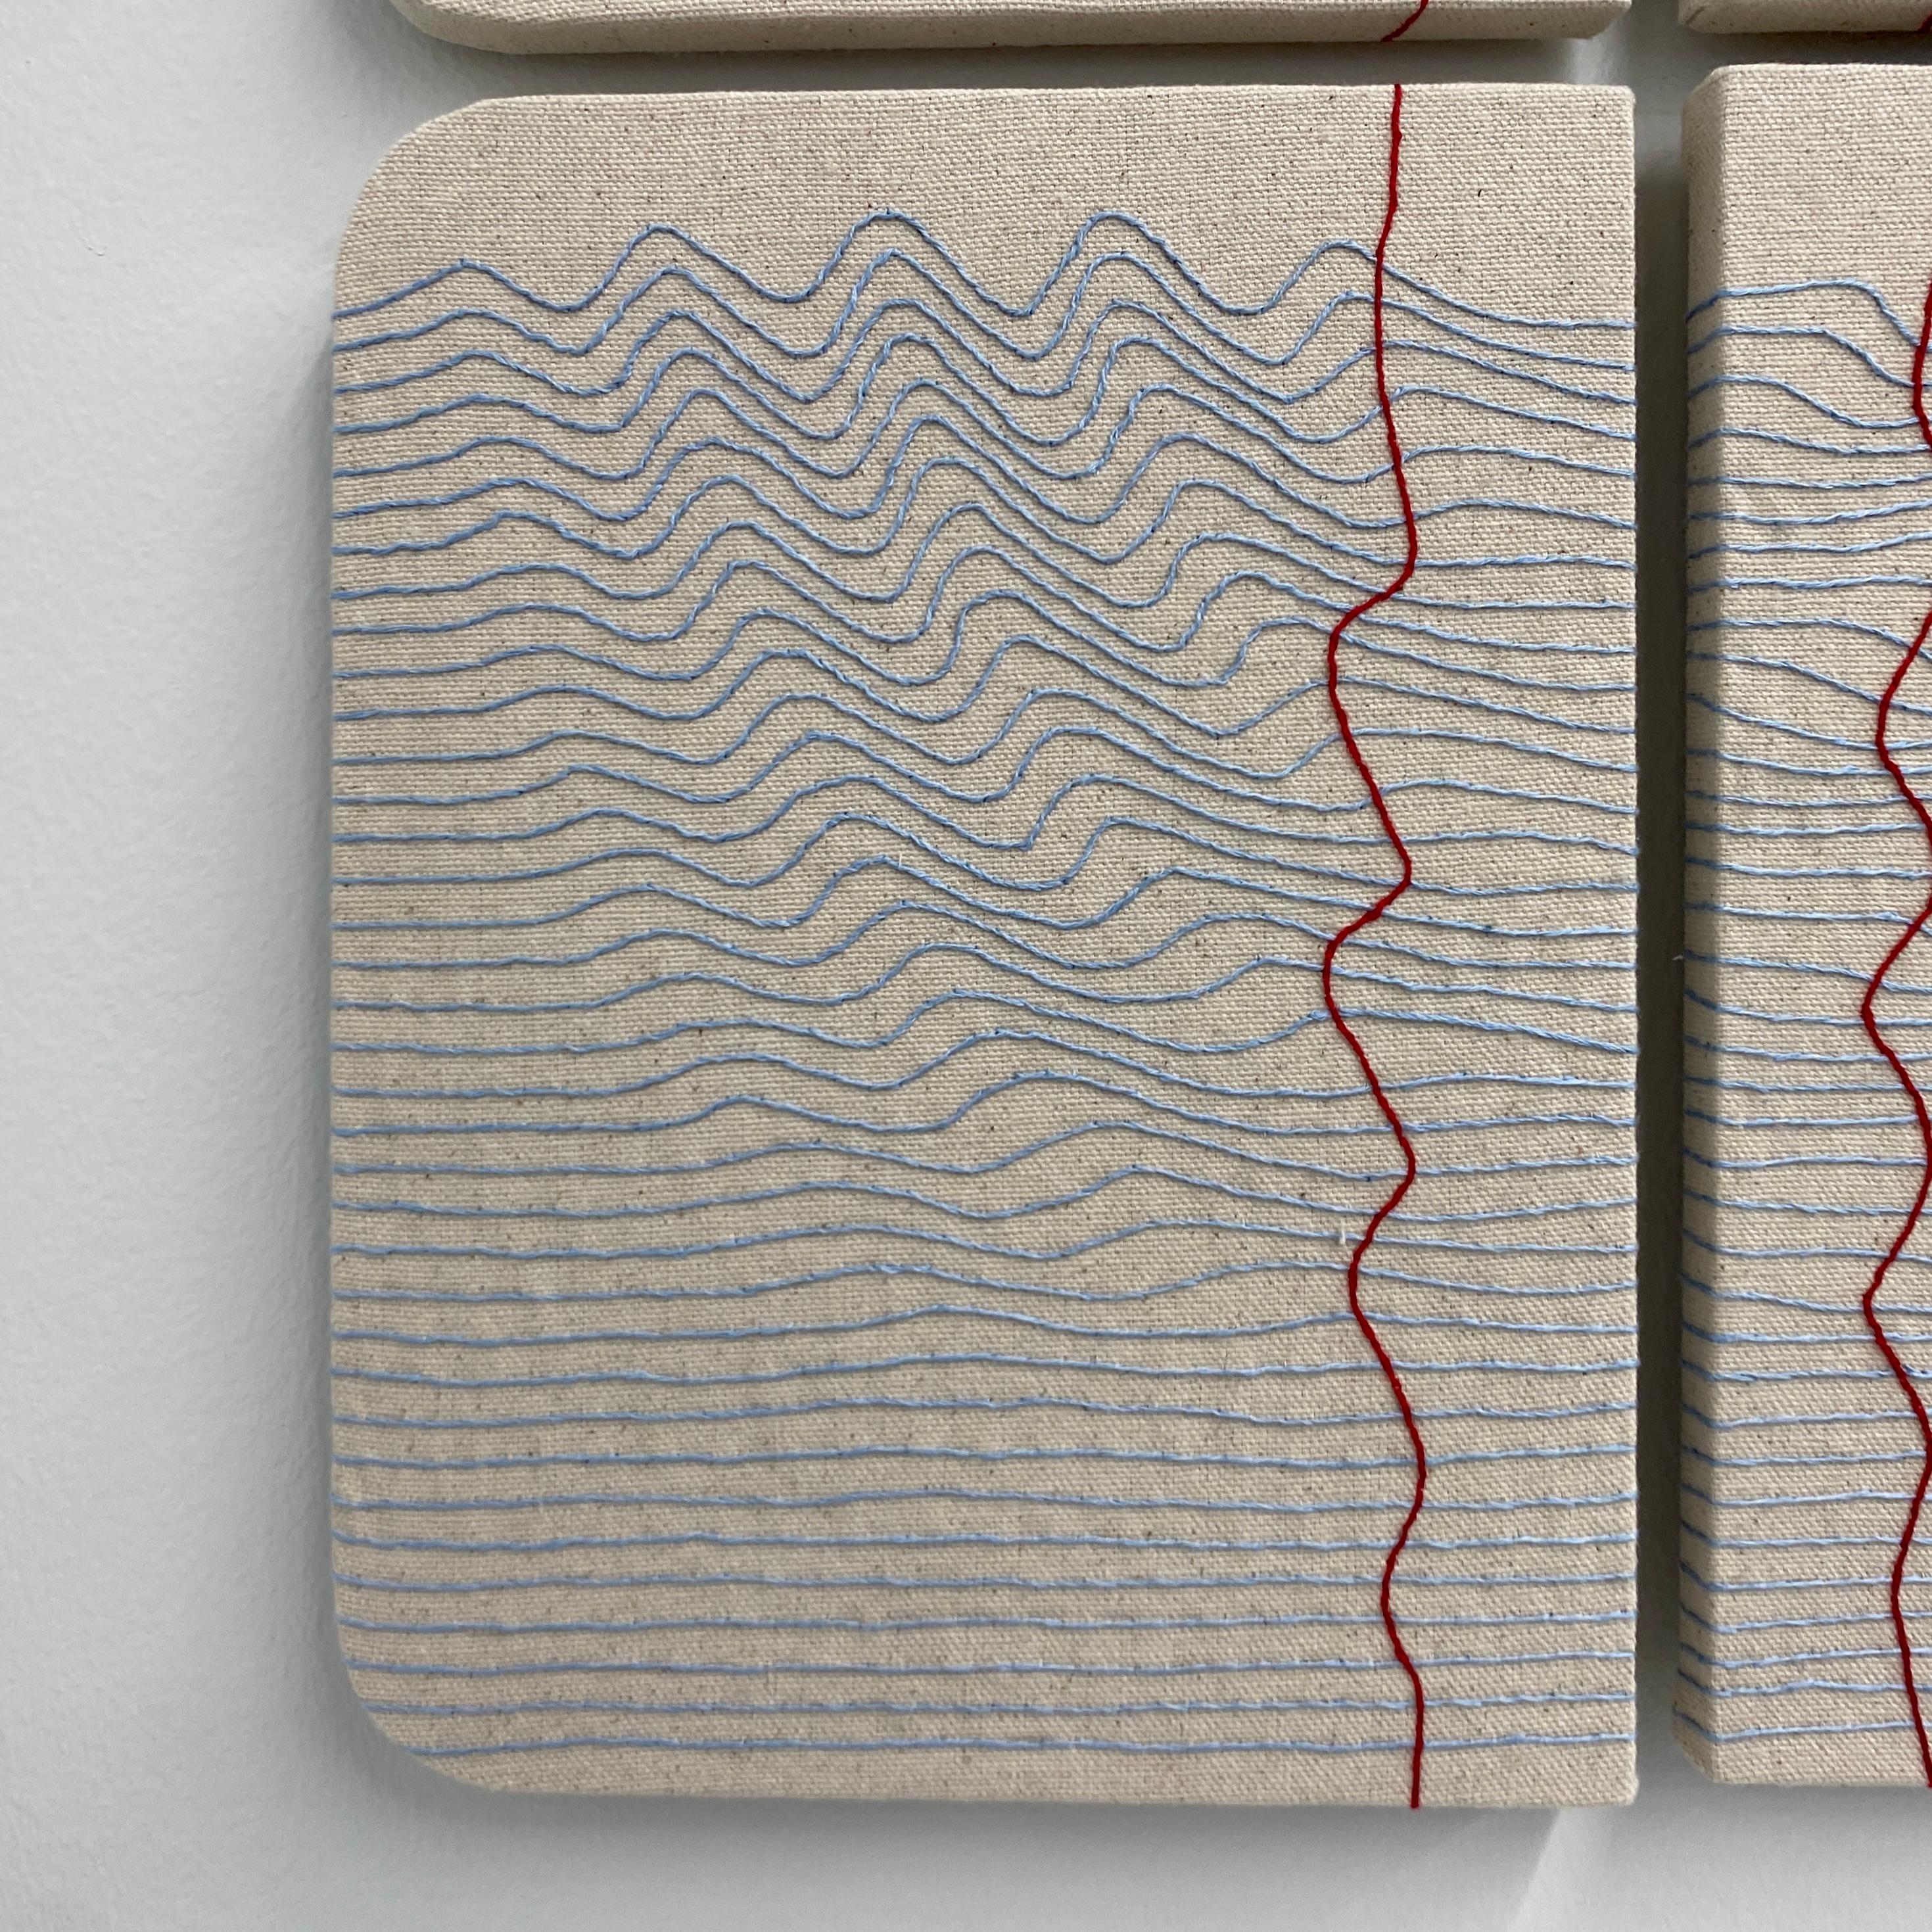 Notes for String Theory 12062022 by Candace Hicks consists of an arrangement of four hand-embroidered canvas panels. Part of a larger series of work, Notes for String Theory focuses on literary coincidence and Hicks’ fascination with the phenomenon